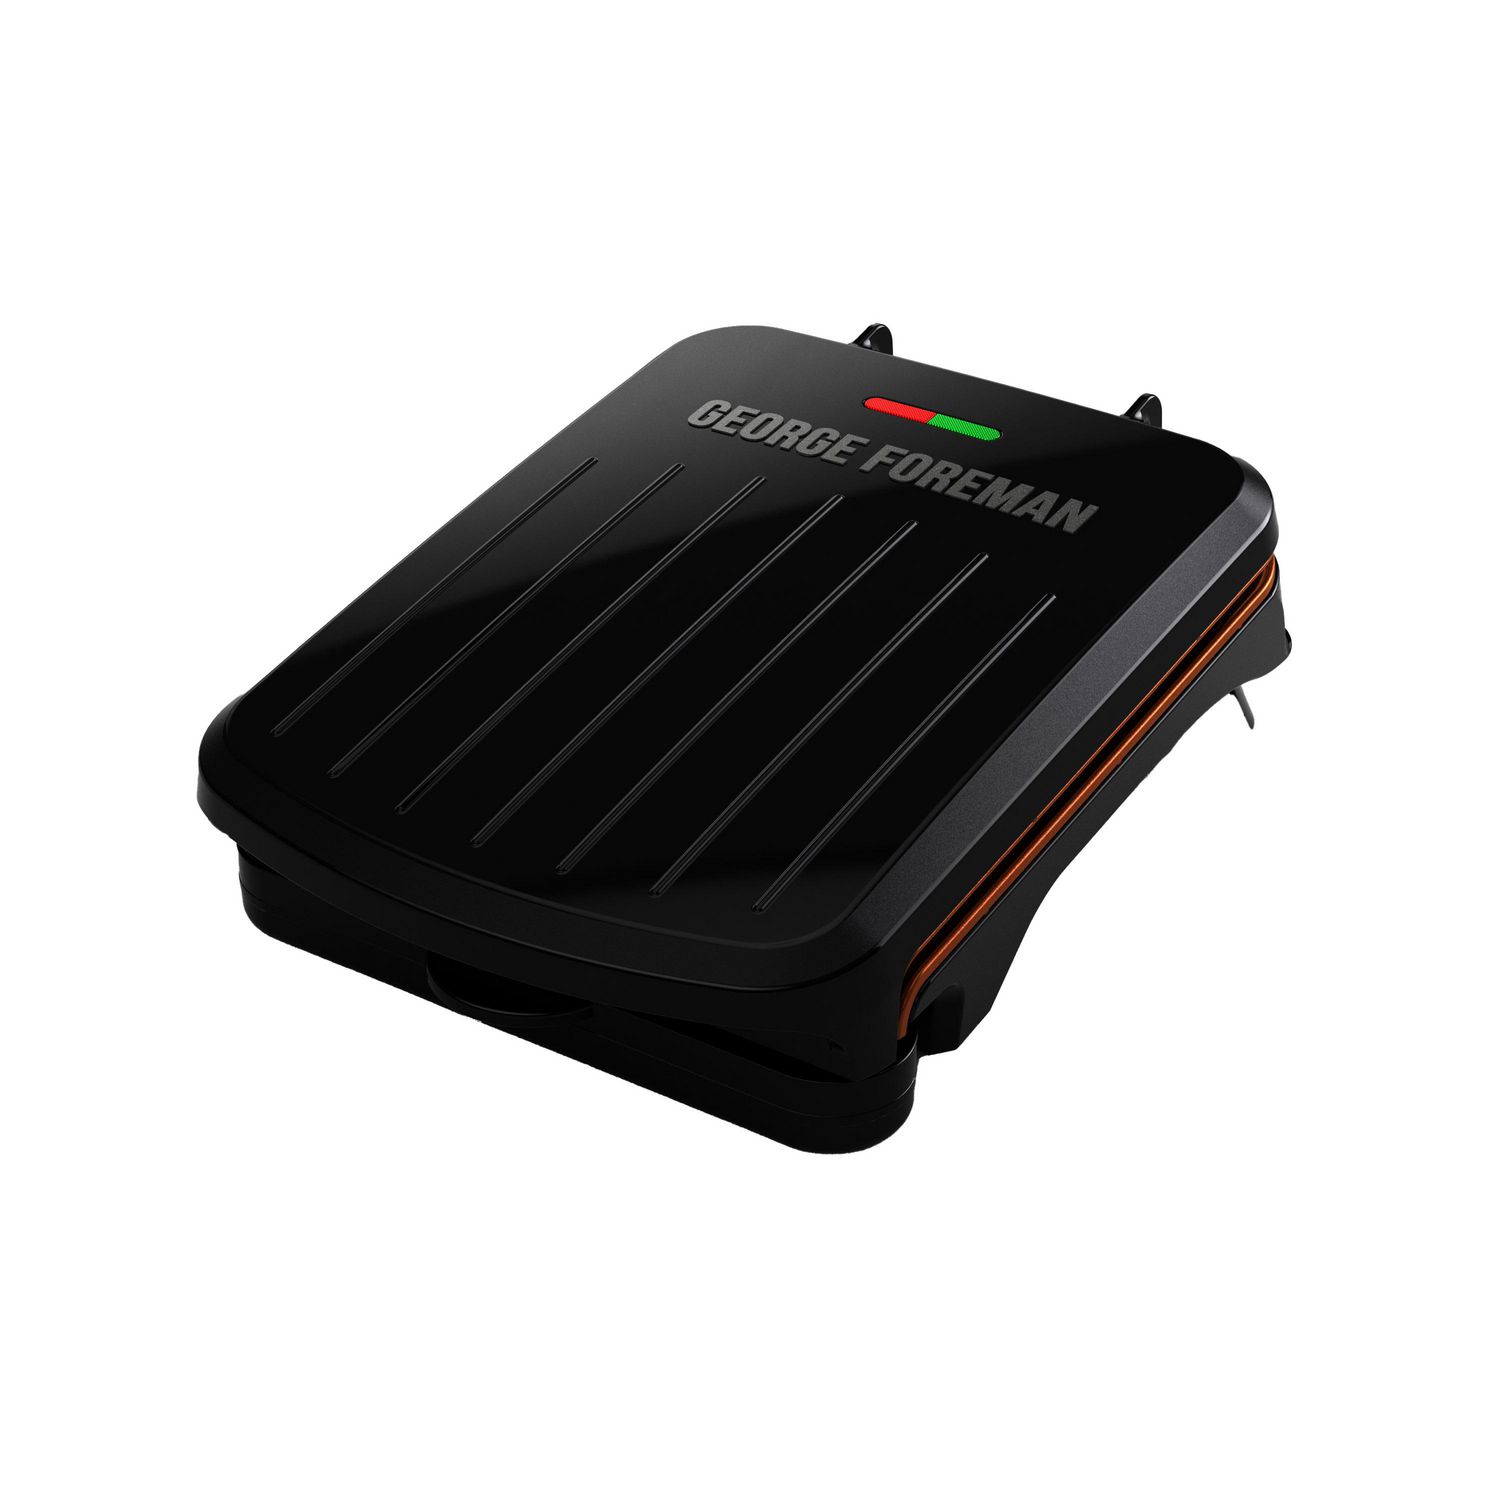 George Foreman 2-Serving Classic Plate Electric Indoor Grill and Panini Press